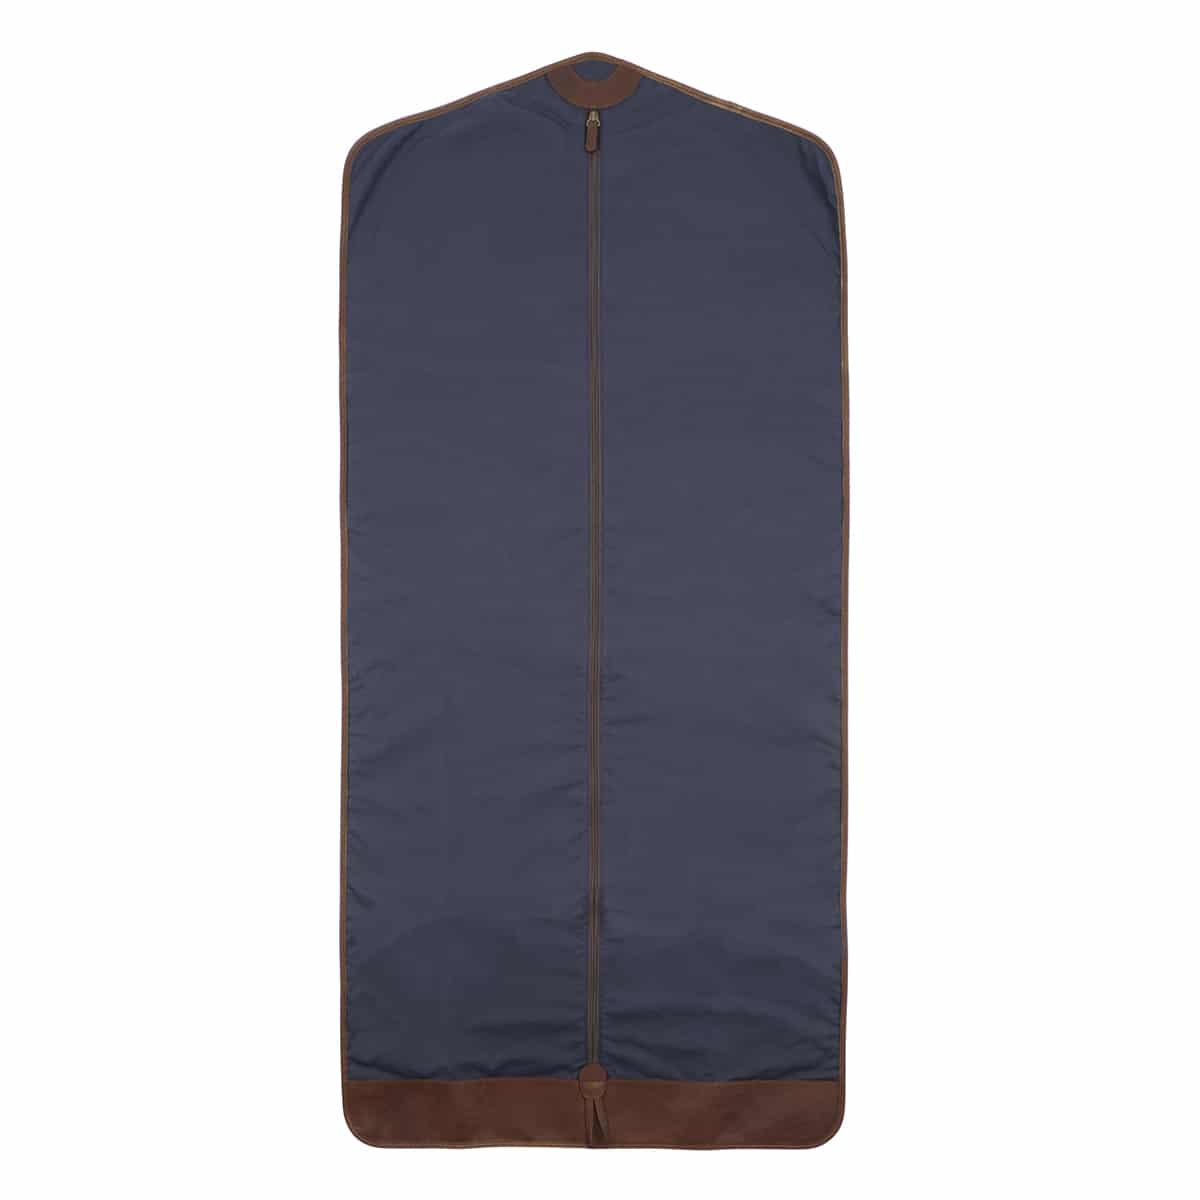 Goodwin Long Garment Sleeve in Navy Ventile and Baldwin Oak by Moore & Giles